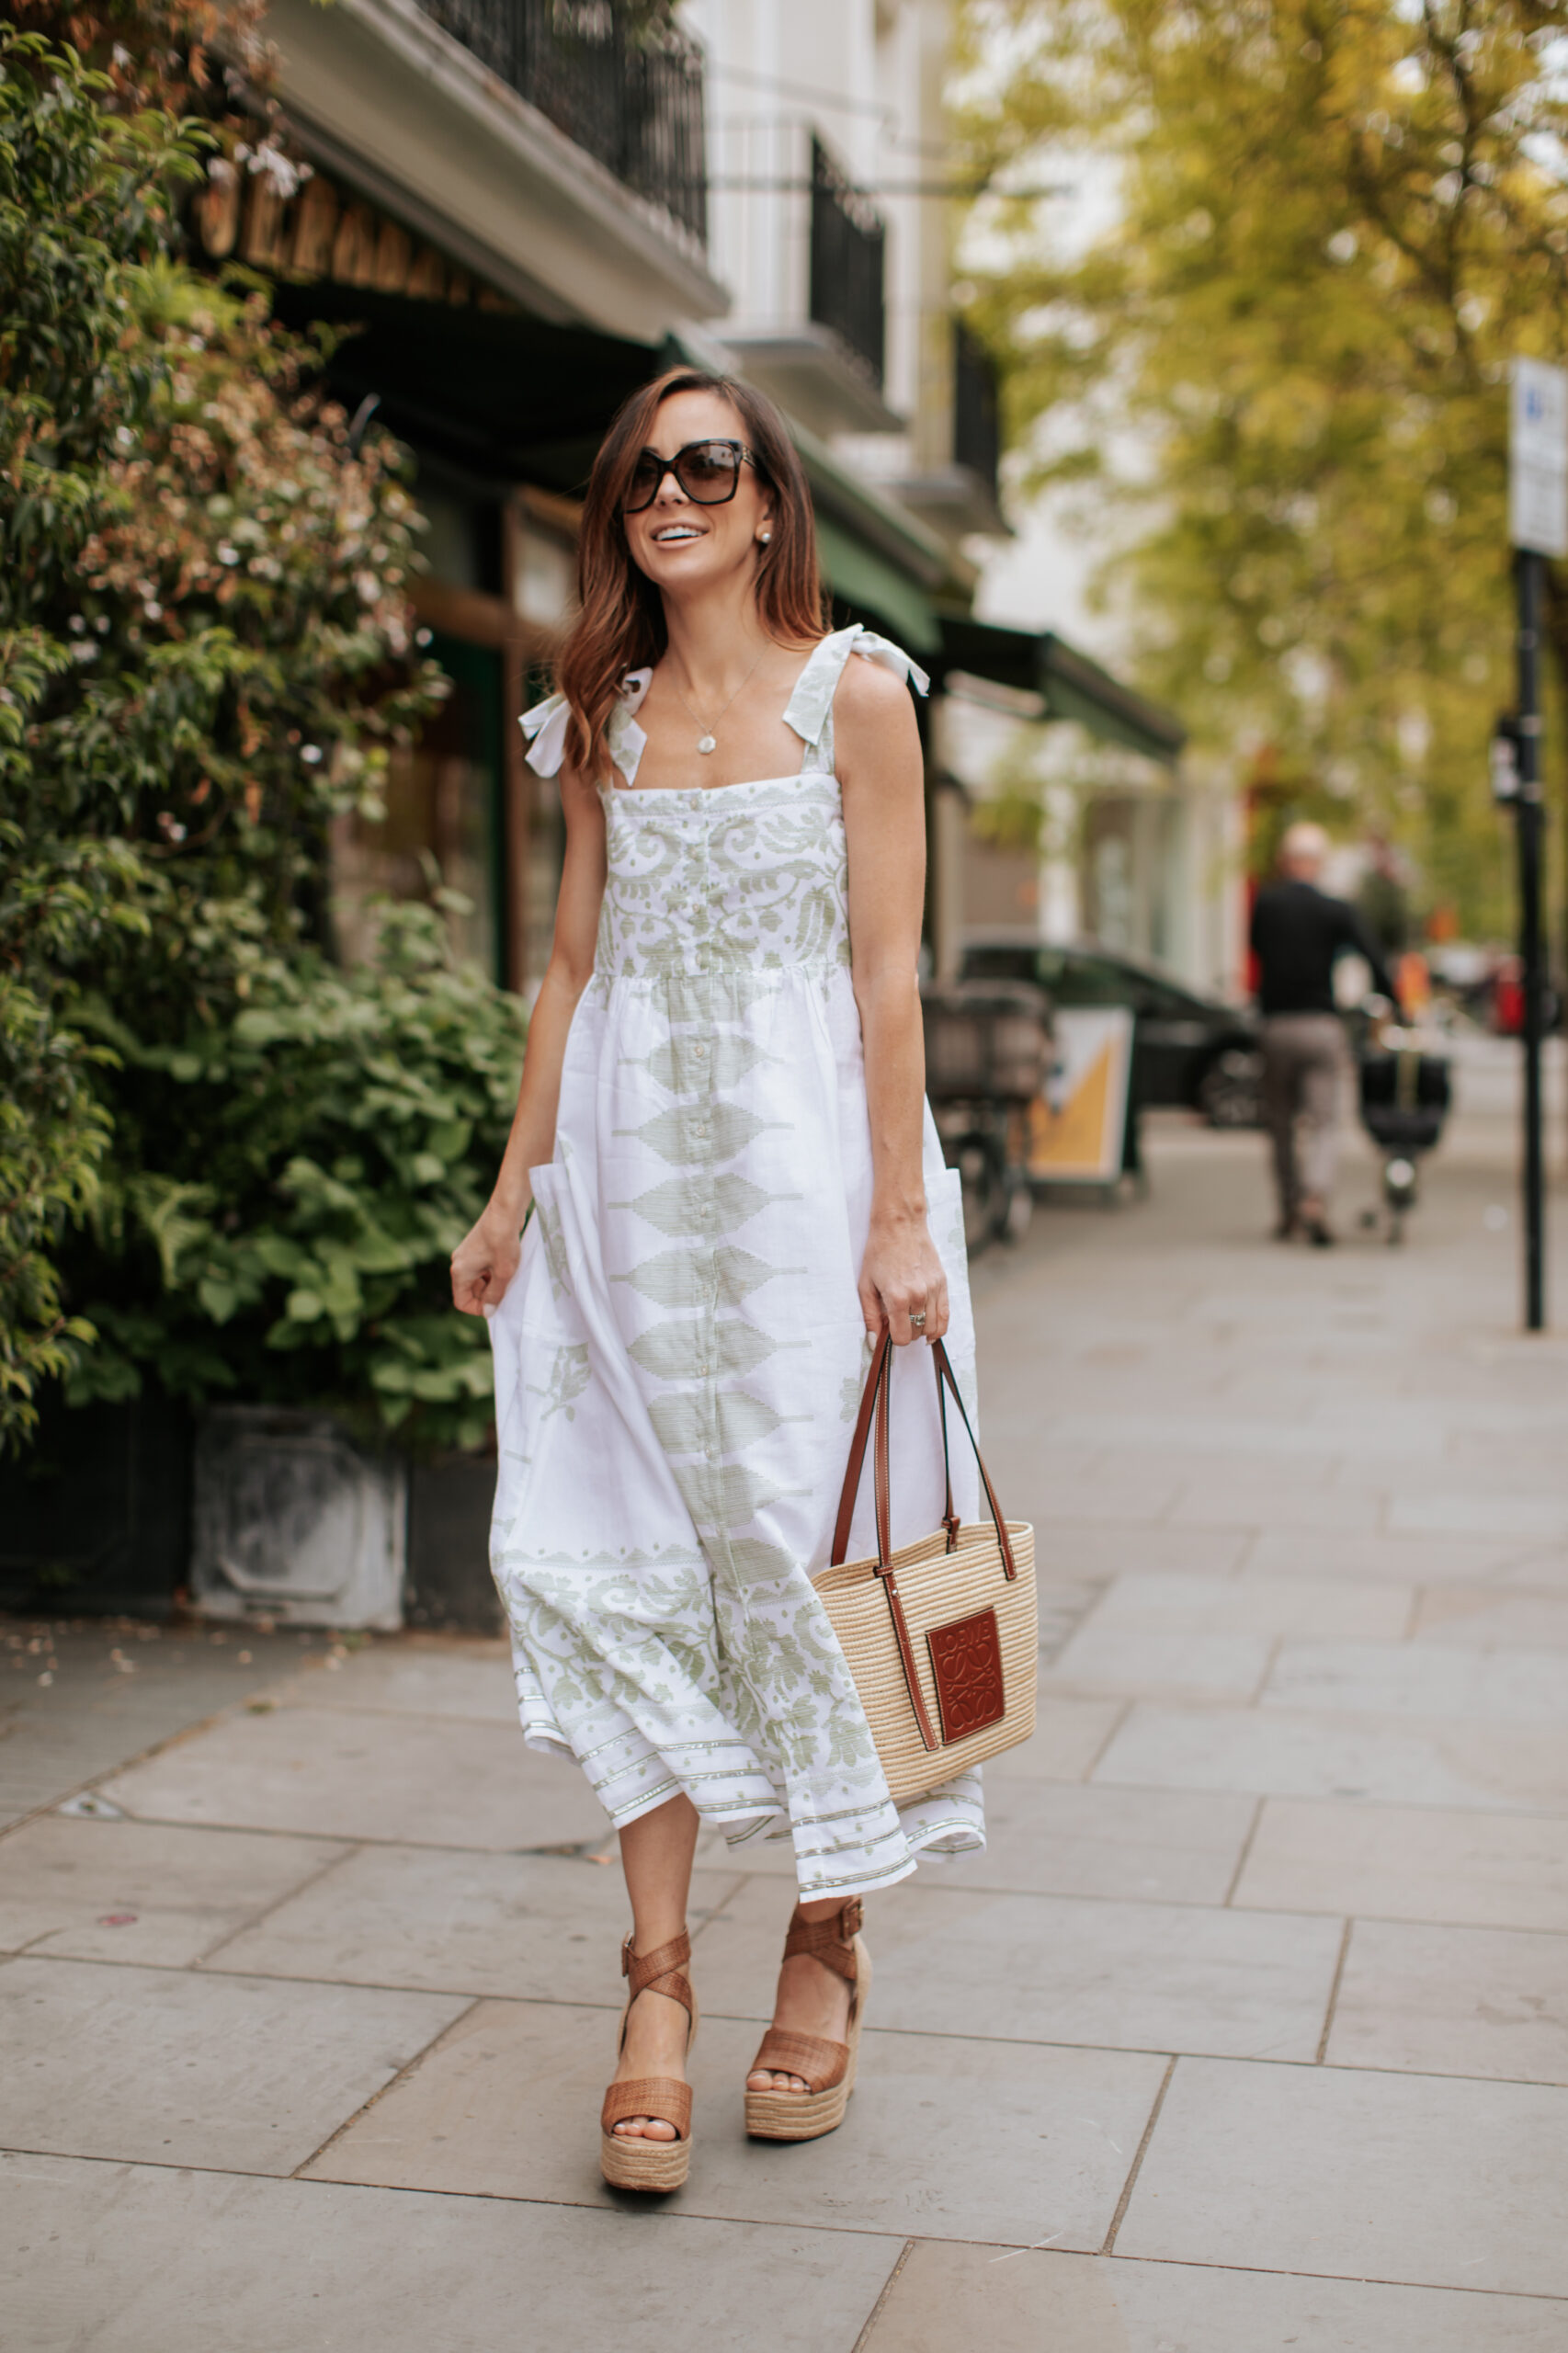 Affordable Outfit For Travel + Exploring in London, Alyson Haley